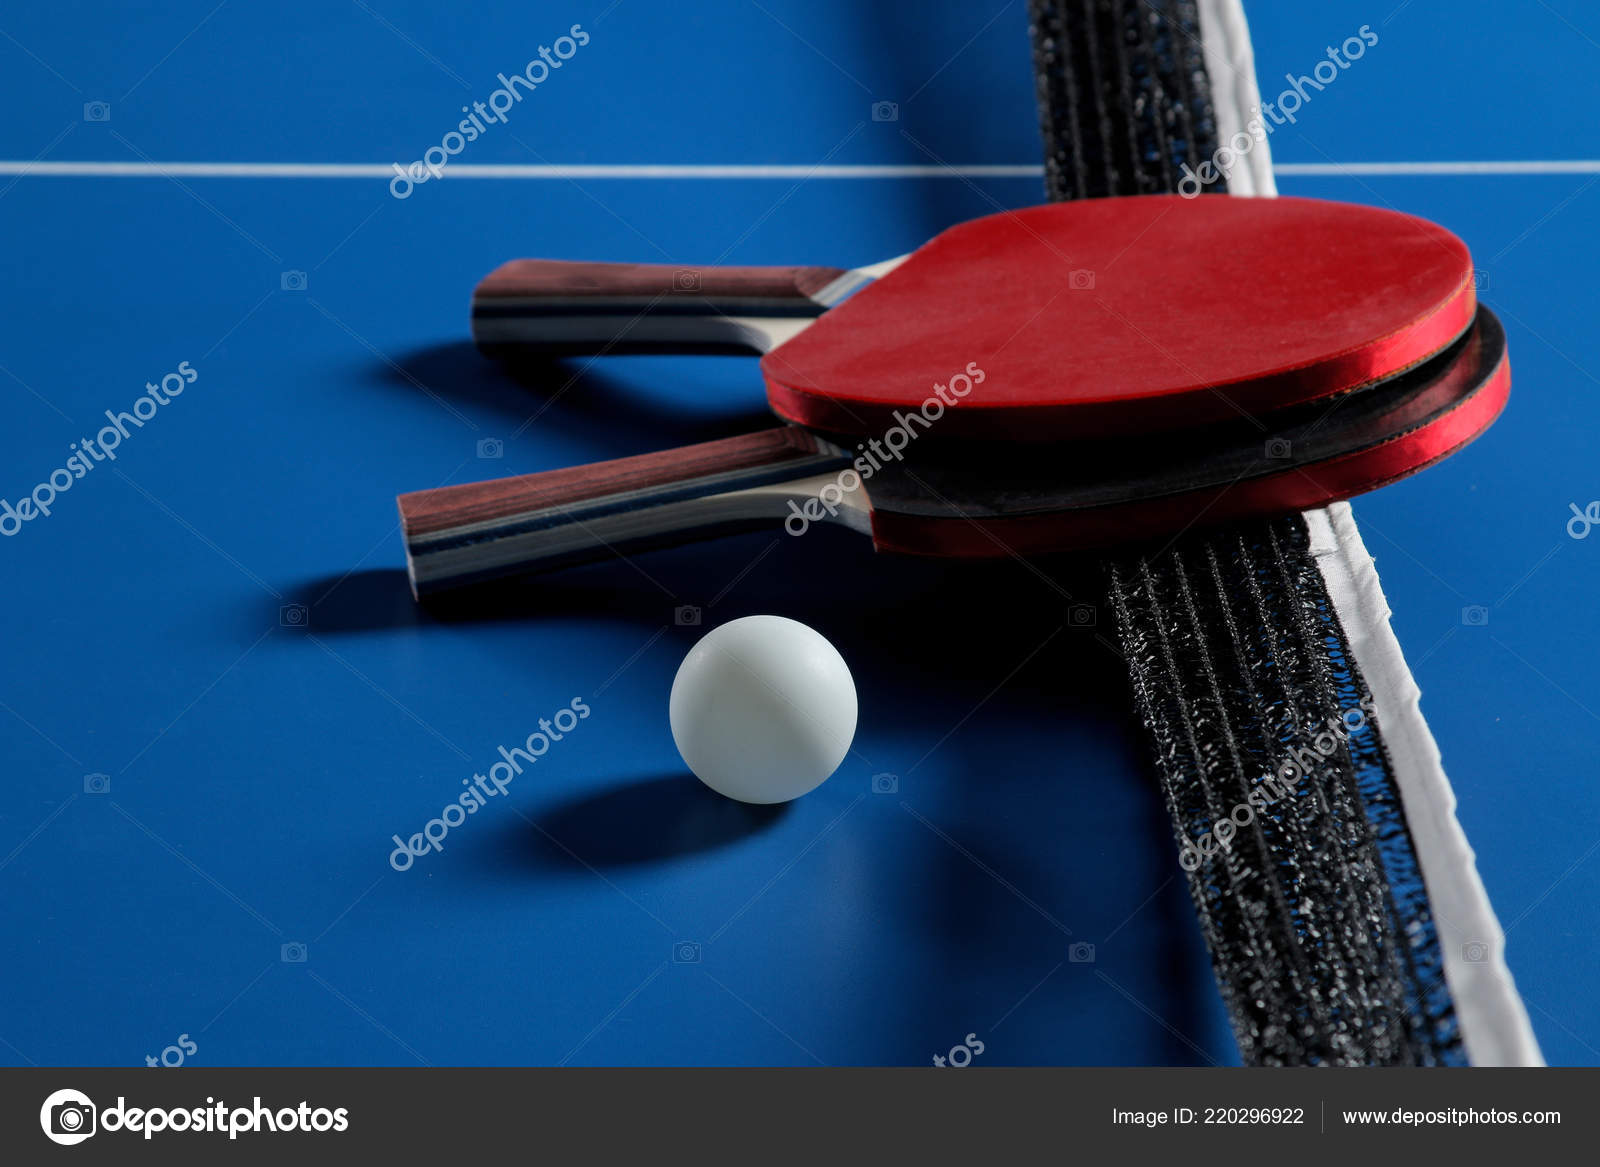 Ping Pong Accessories Table Tennis Racket Ball Blue Tennis Table